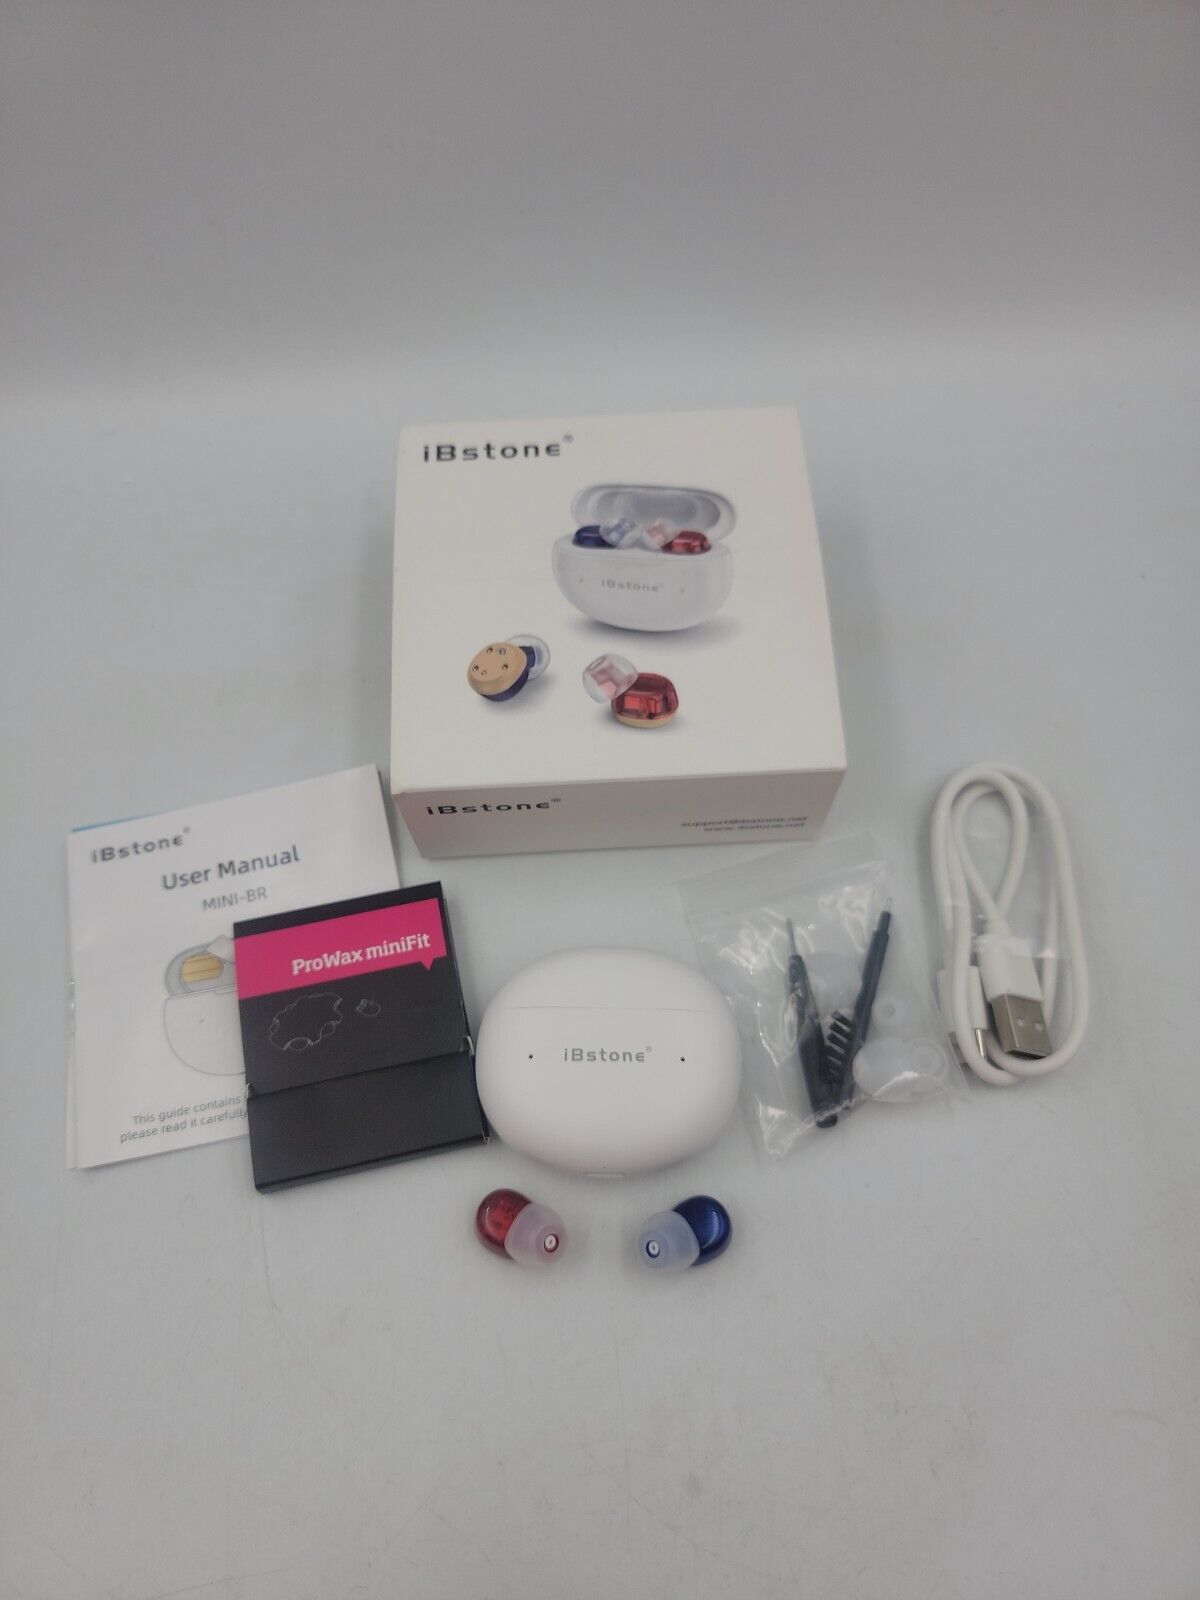 IBstone Mini BR Hearing Aid Completely-in-Canal Hearing Amplifier OPENED BOX